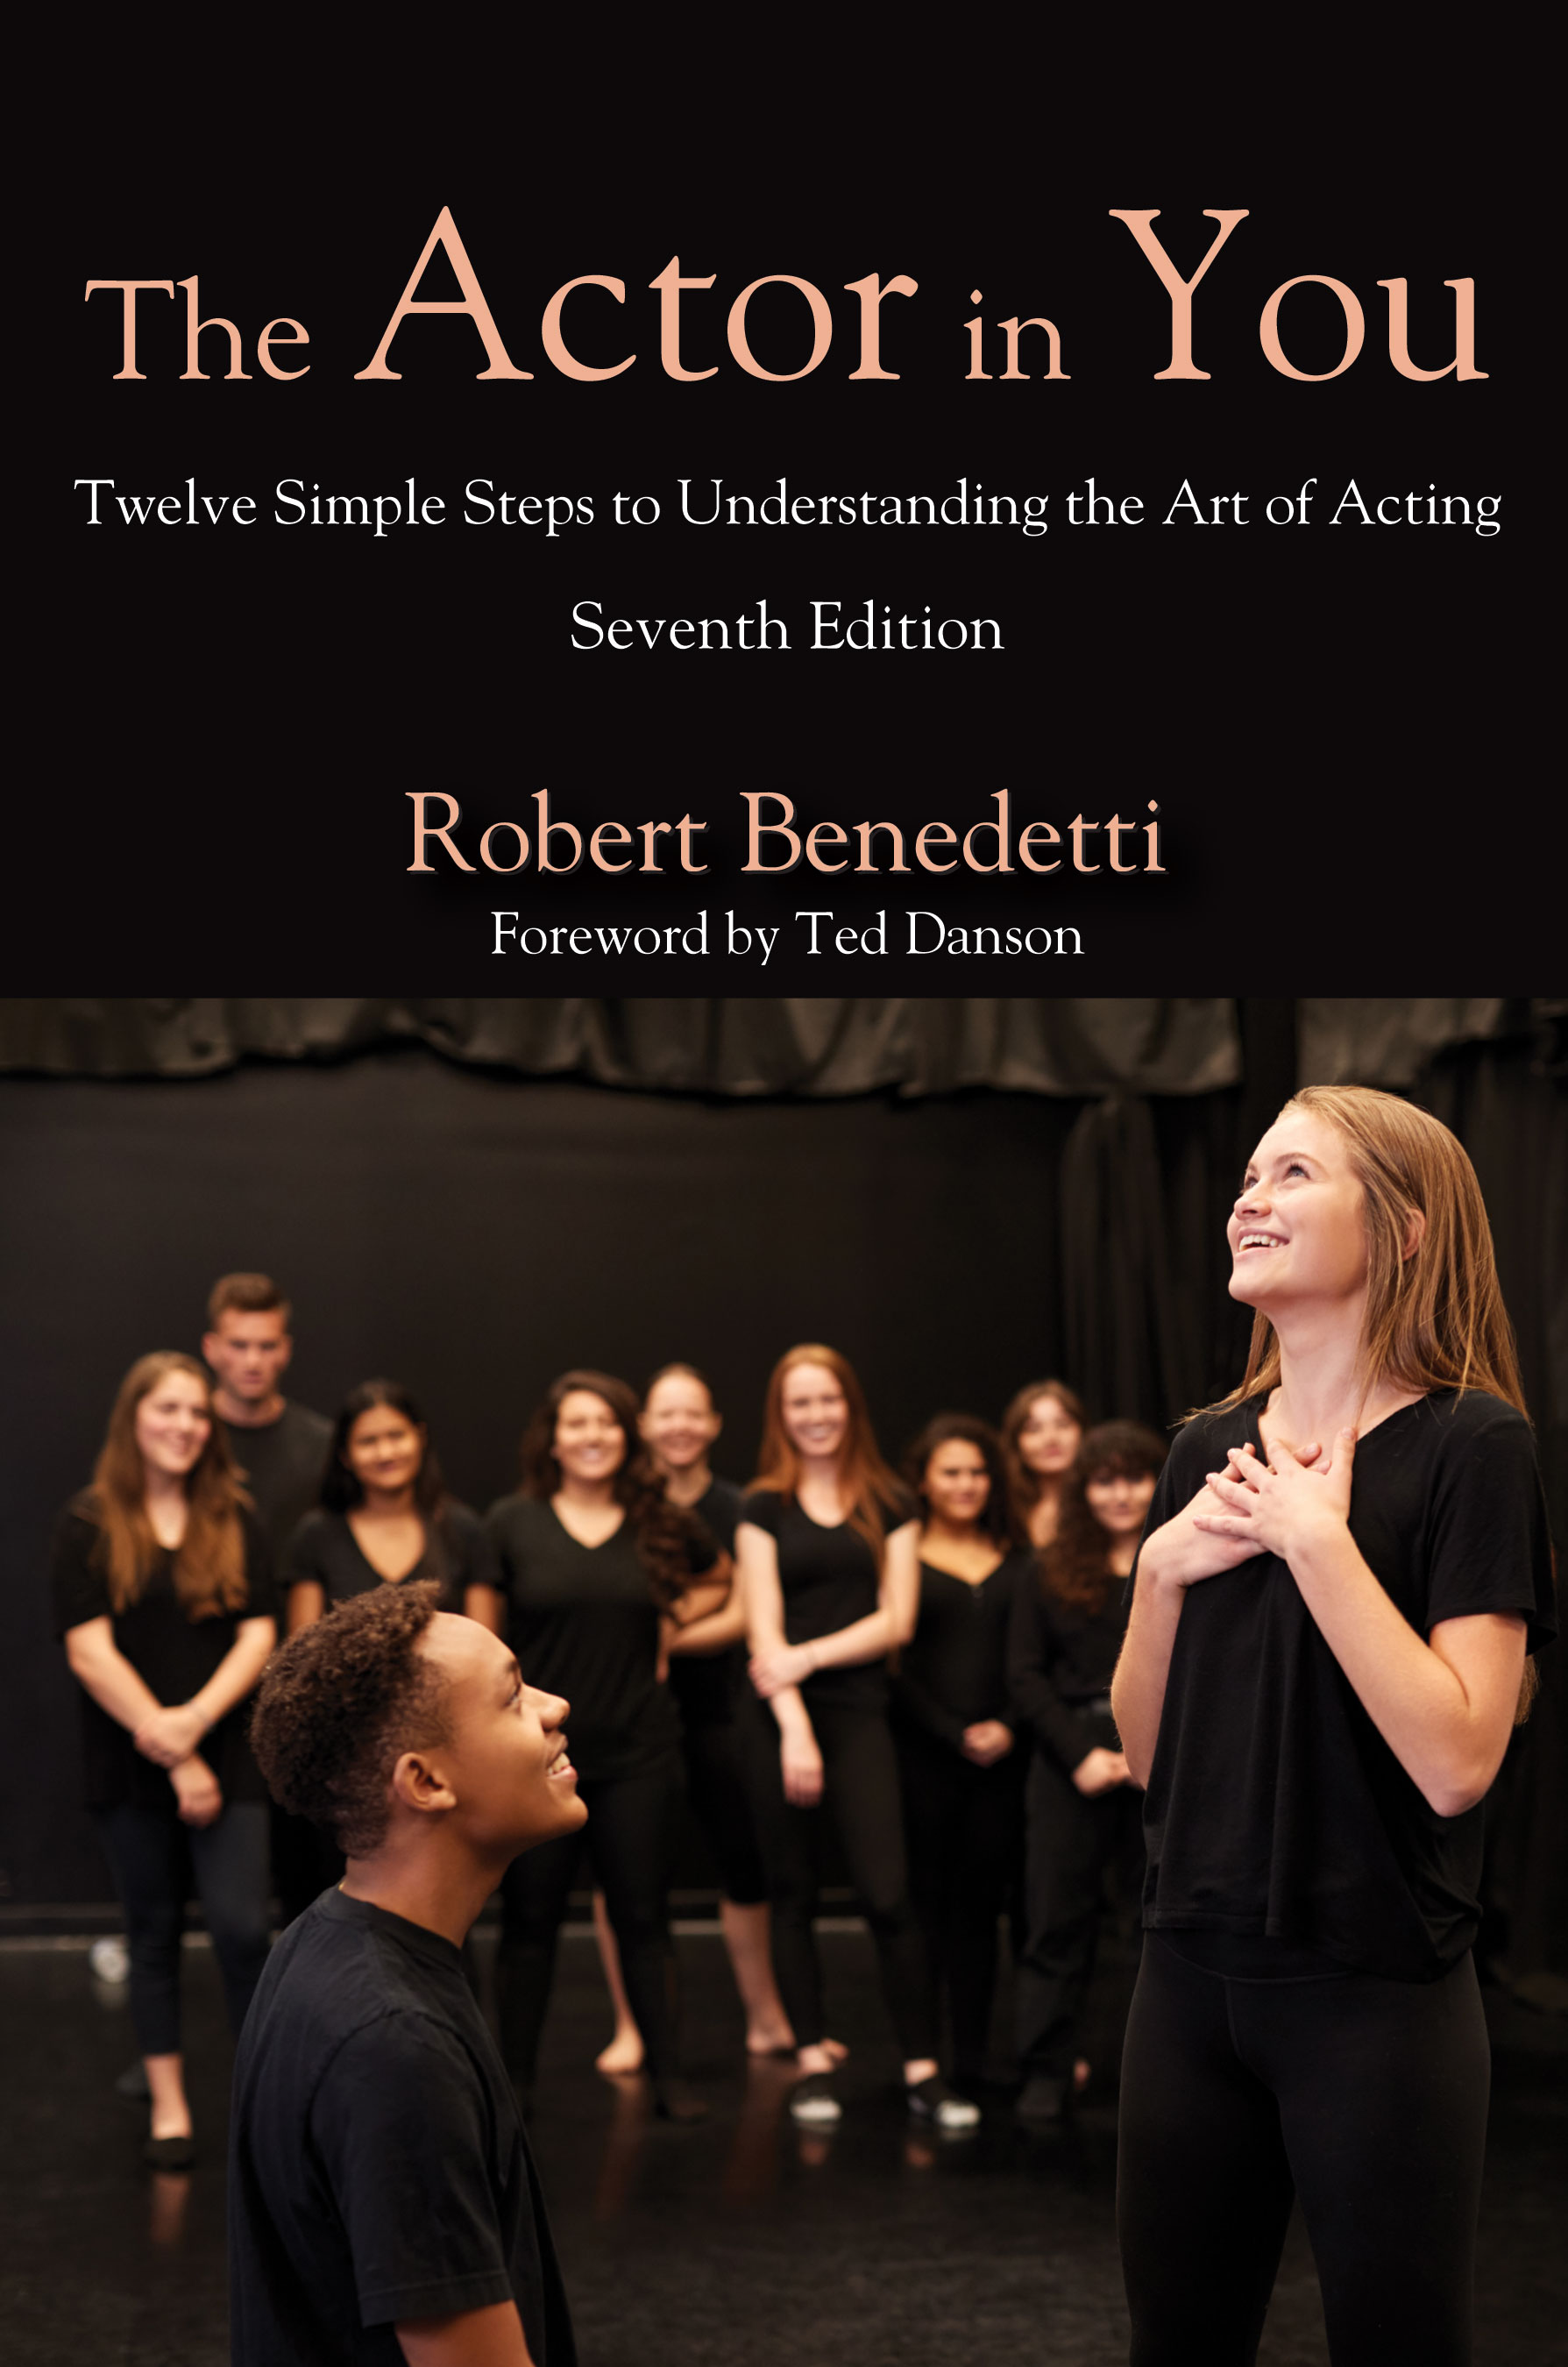 The Actor in You: Twelve Simple Steps to Understanding the Art of Acting, Seventh Edition by Robert  Benedetti